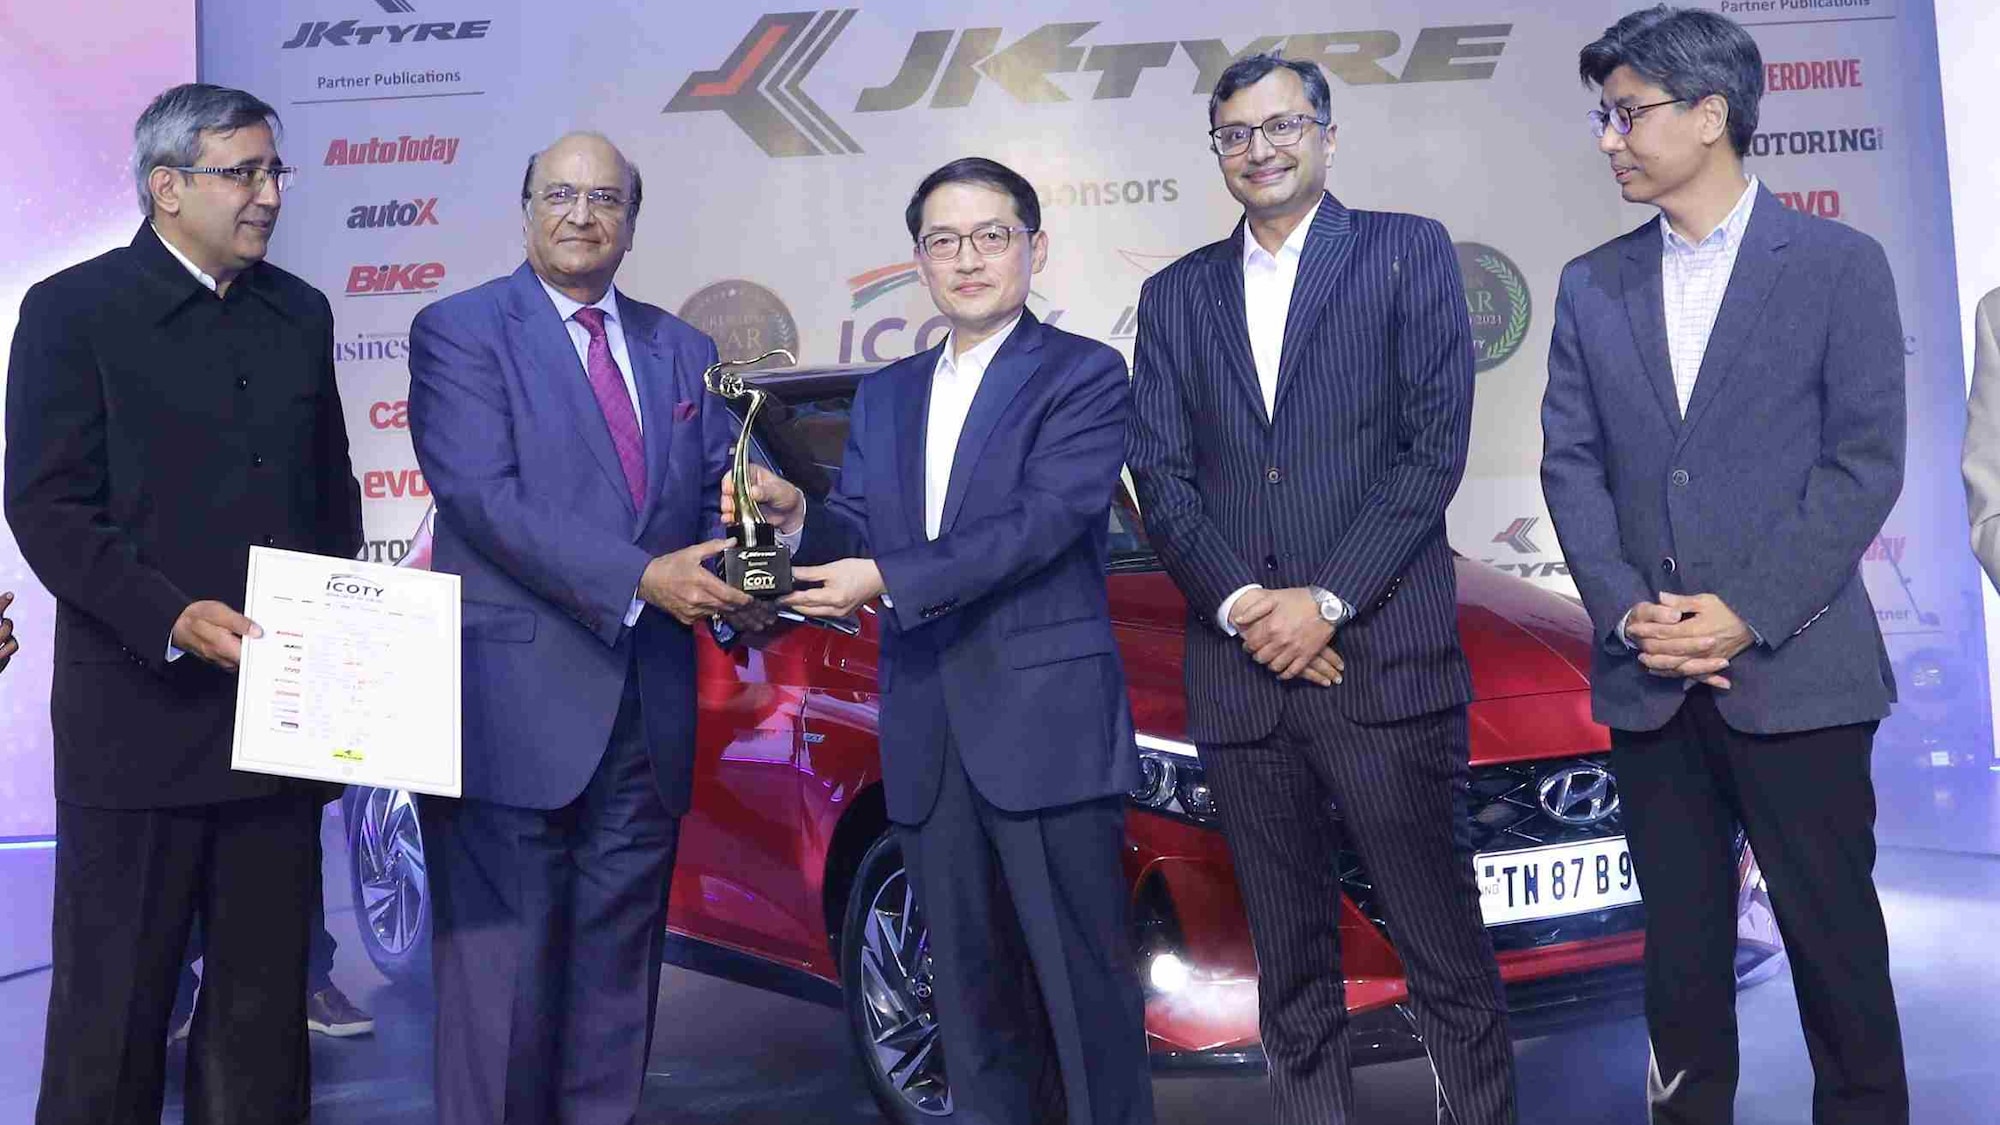 The third-gen Hyundai i20 follows in the footsteps of the Hyundai Venue, which was crowned Indian Car of the Year in 2020. Image: JK Tyre